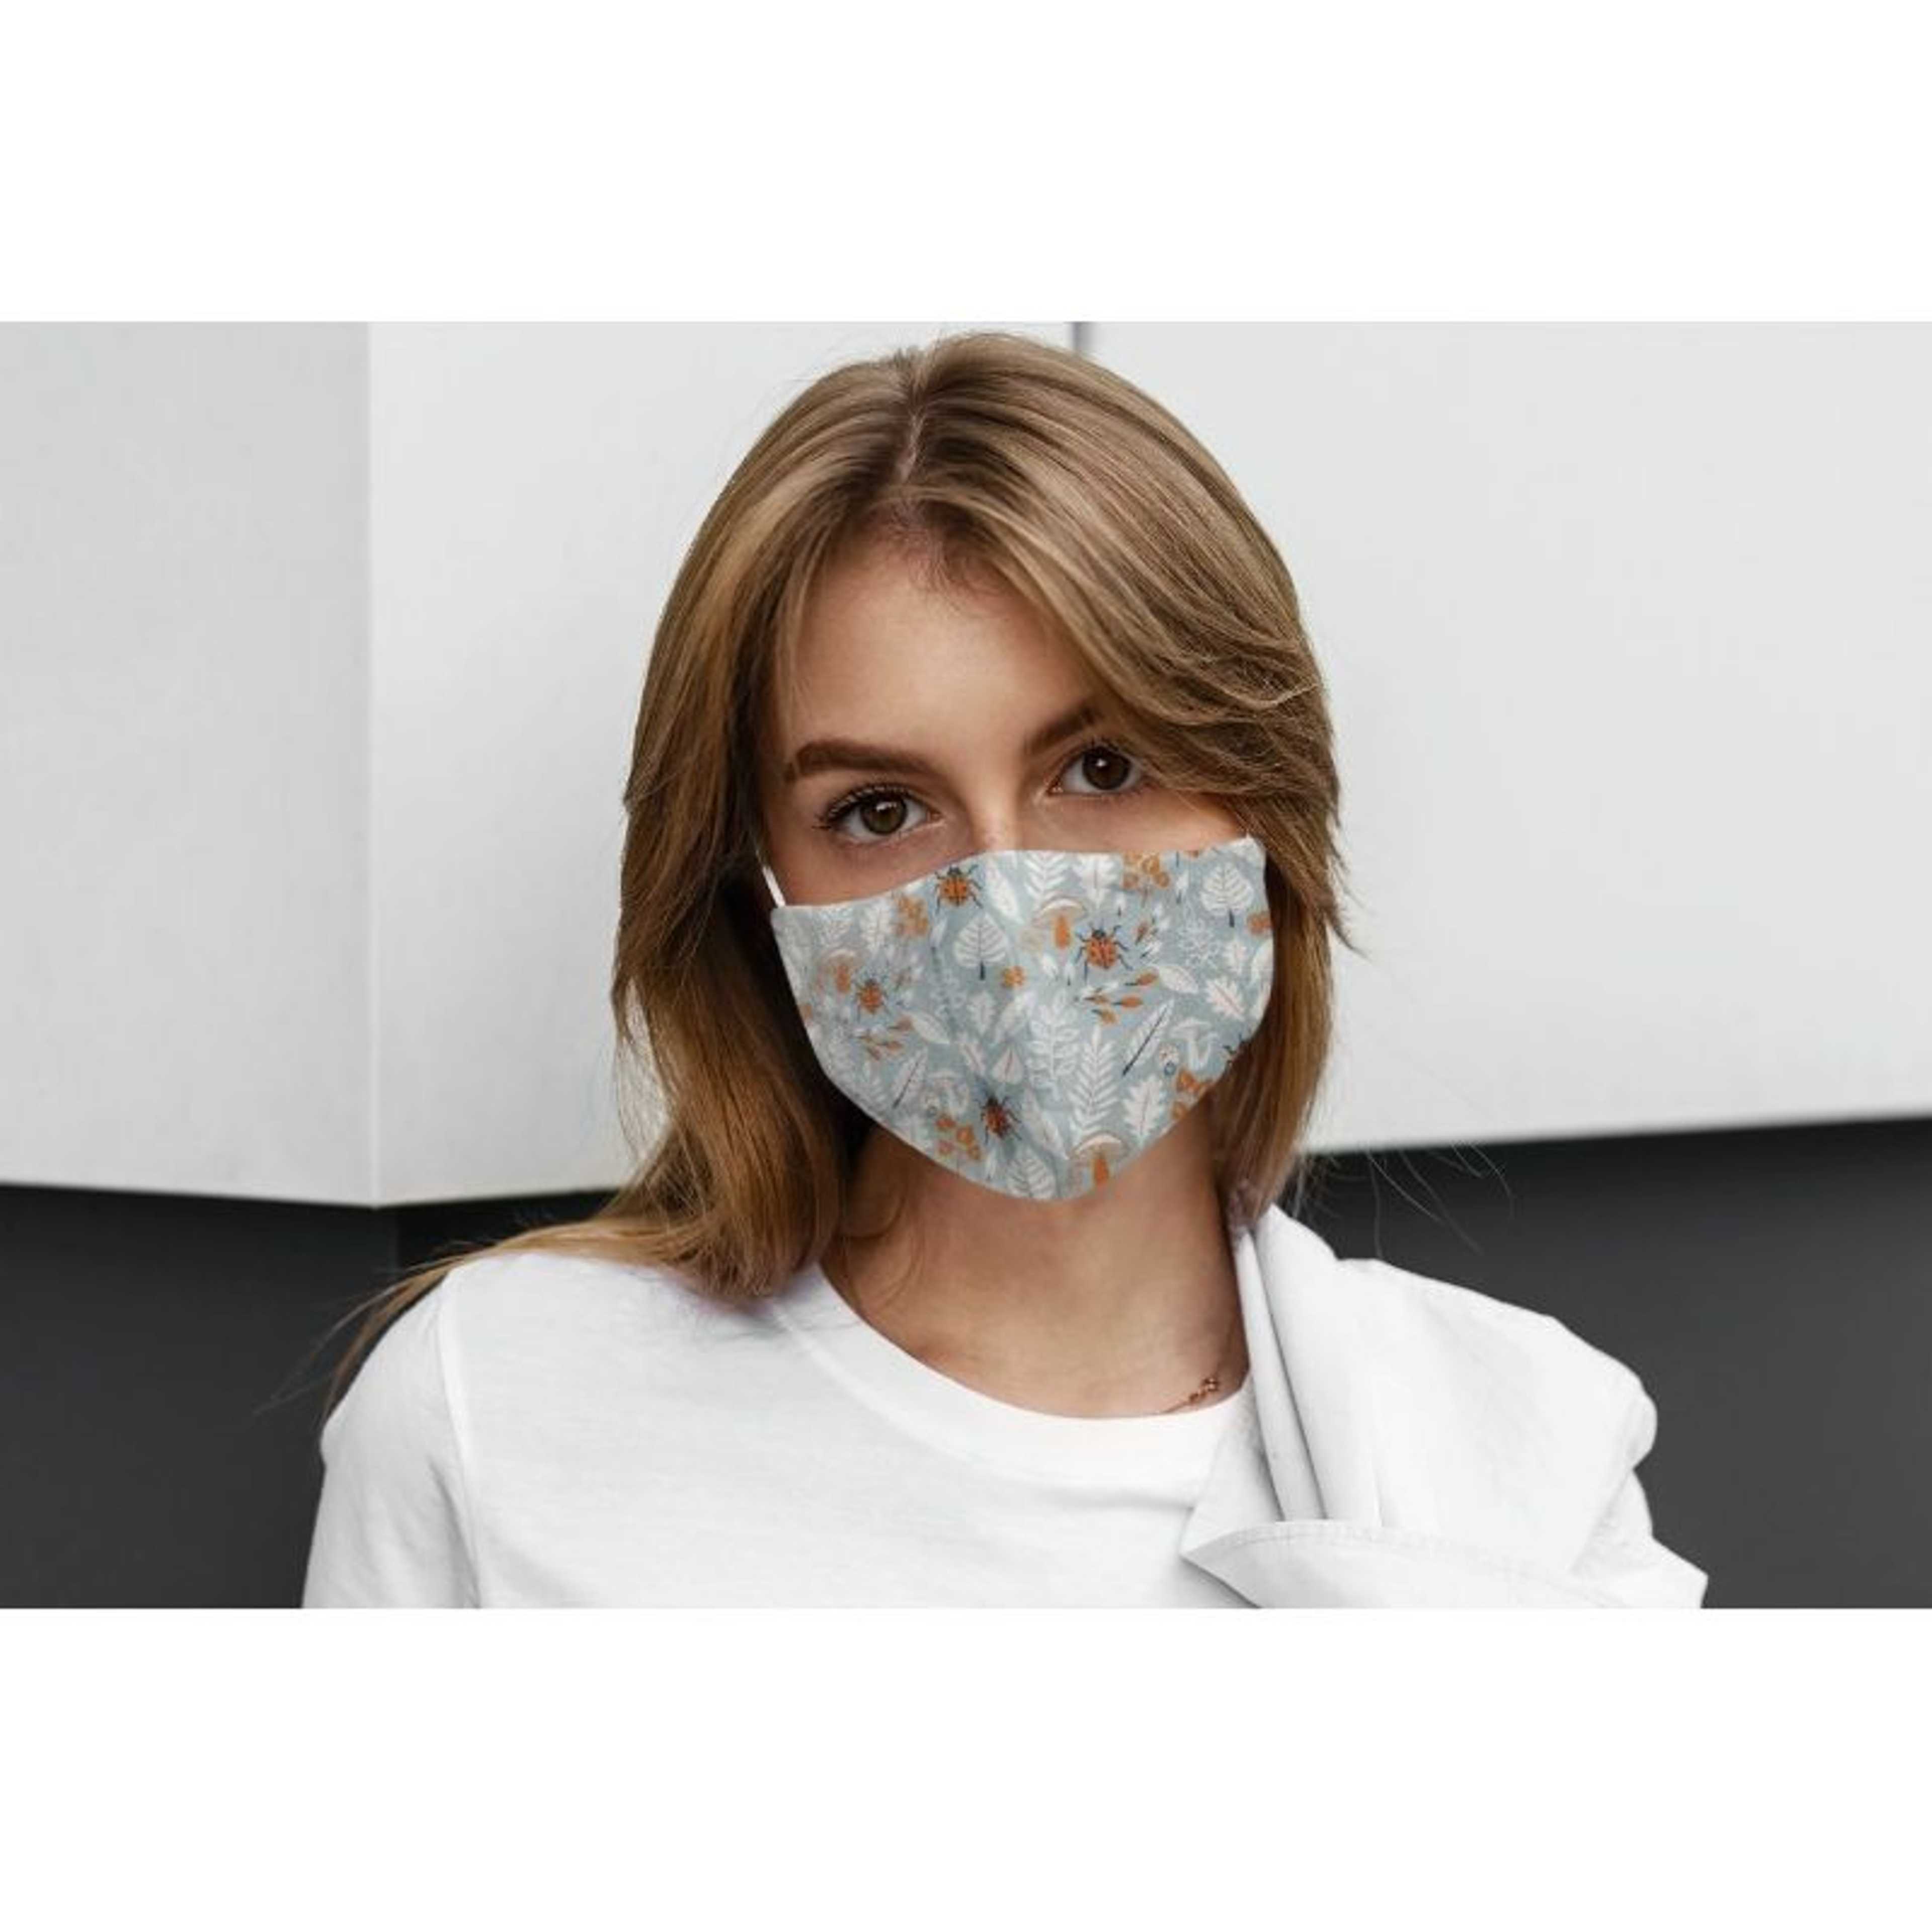 "Amazing Cotton Face Mask - Washable Cotton Mask -Unisex Adult Face Mask Fitted Face Mask - Breathable Face Mask, Reusable Face Cover "